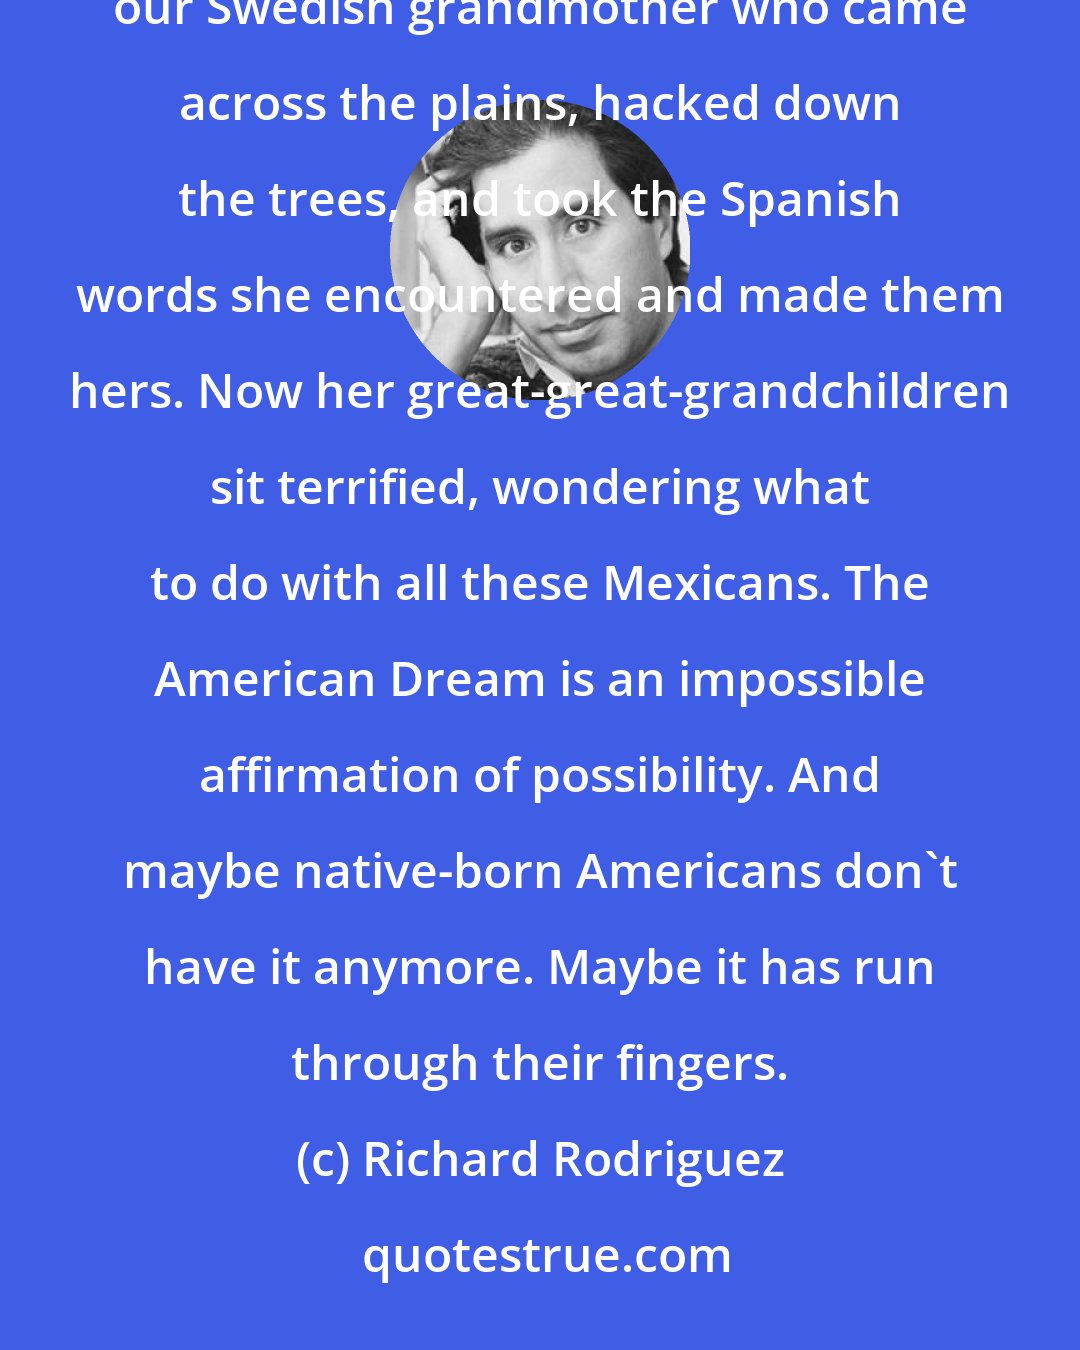 Richard Rodriguez: Maybe the American Dream is too rich for us now in the U.S. Maybe we're losing it because we are not like our Swedish grandmother who came across the plains, hacked down the trees, and took the Spanish words she encountered and made them hers. Now her great-great-grandchildren sit terrified, wondering what to do with all these Mexicans. The American Dream is an impossible affirmation of possibility. And maybe native-born Americans don't have it anymore. Maybe it has run through their fingers.